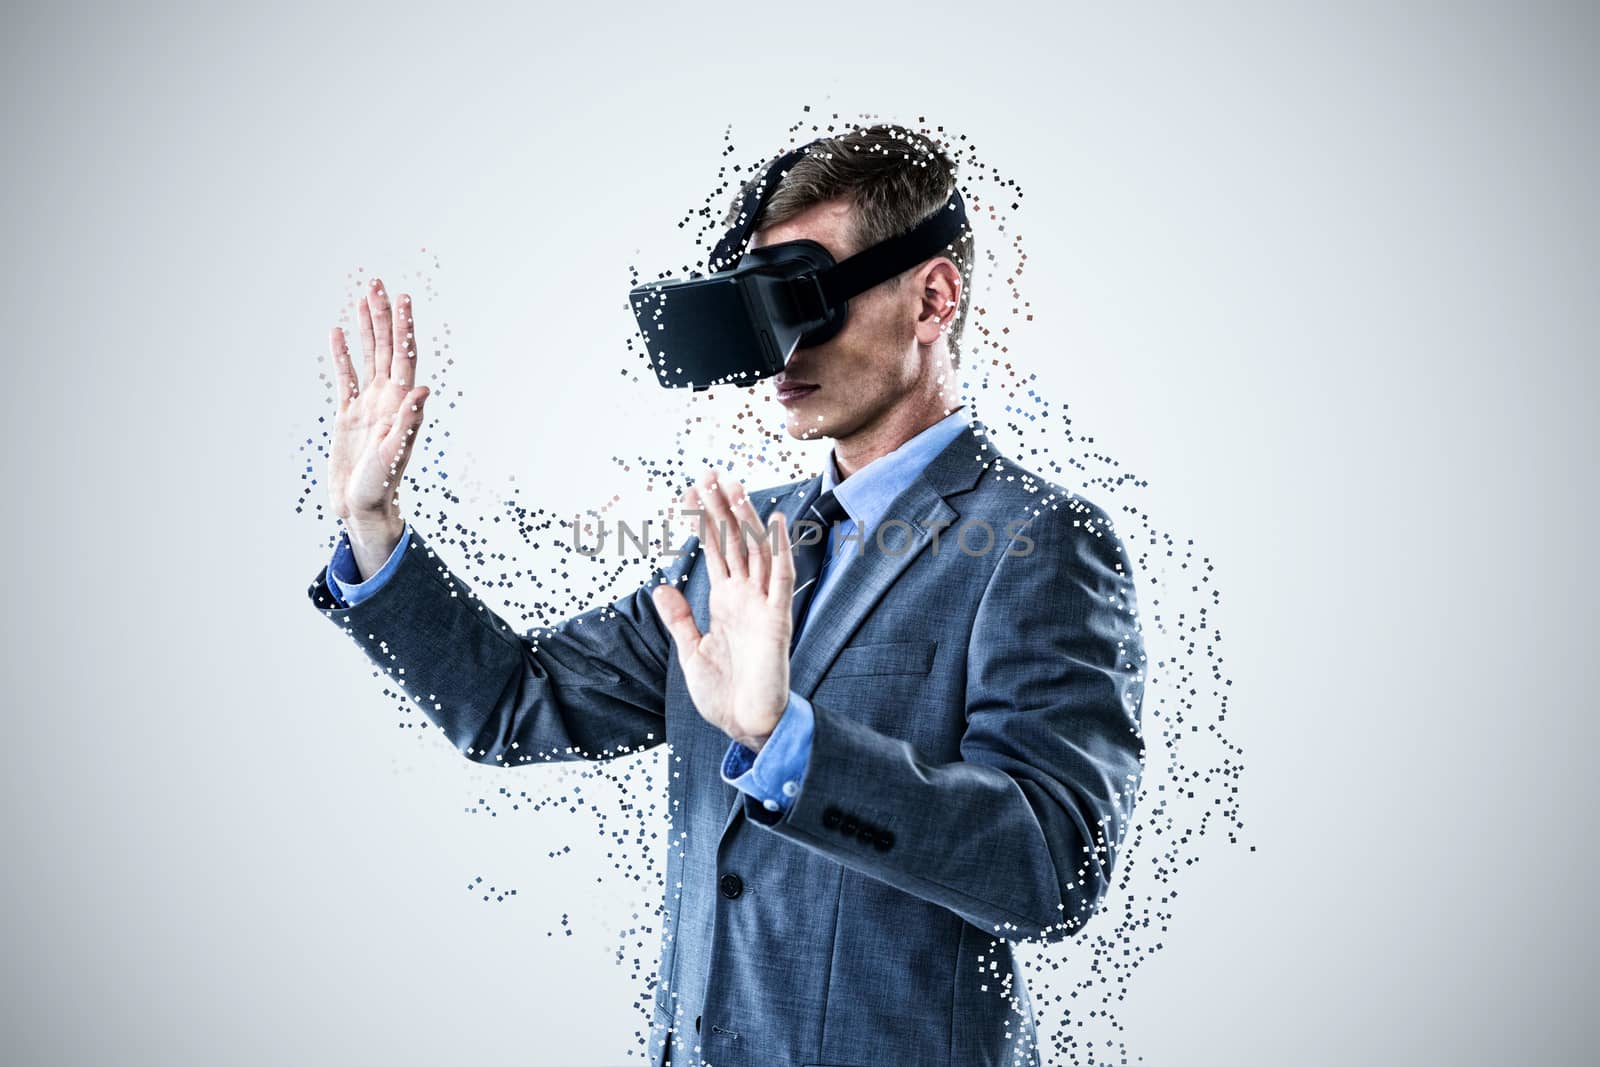 Composite image of businessman using virtual reality headset by Wavebreakmedia